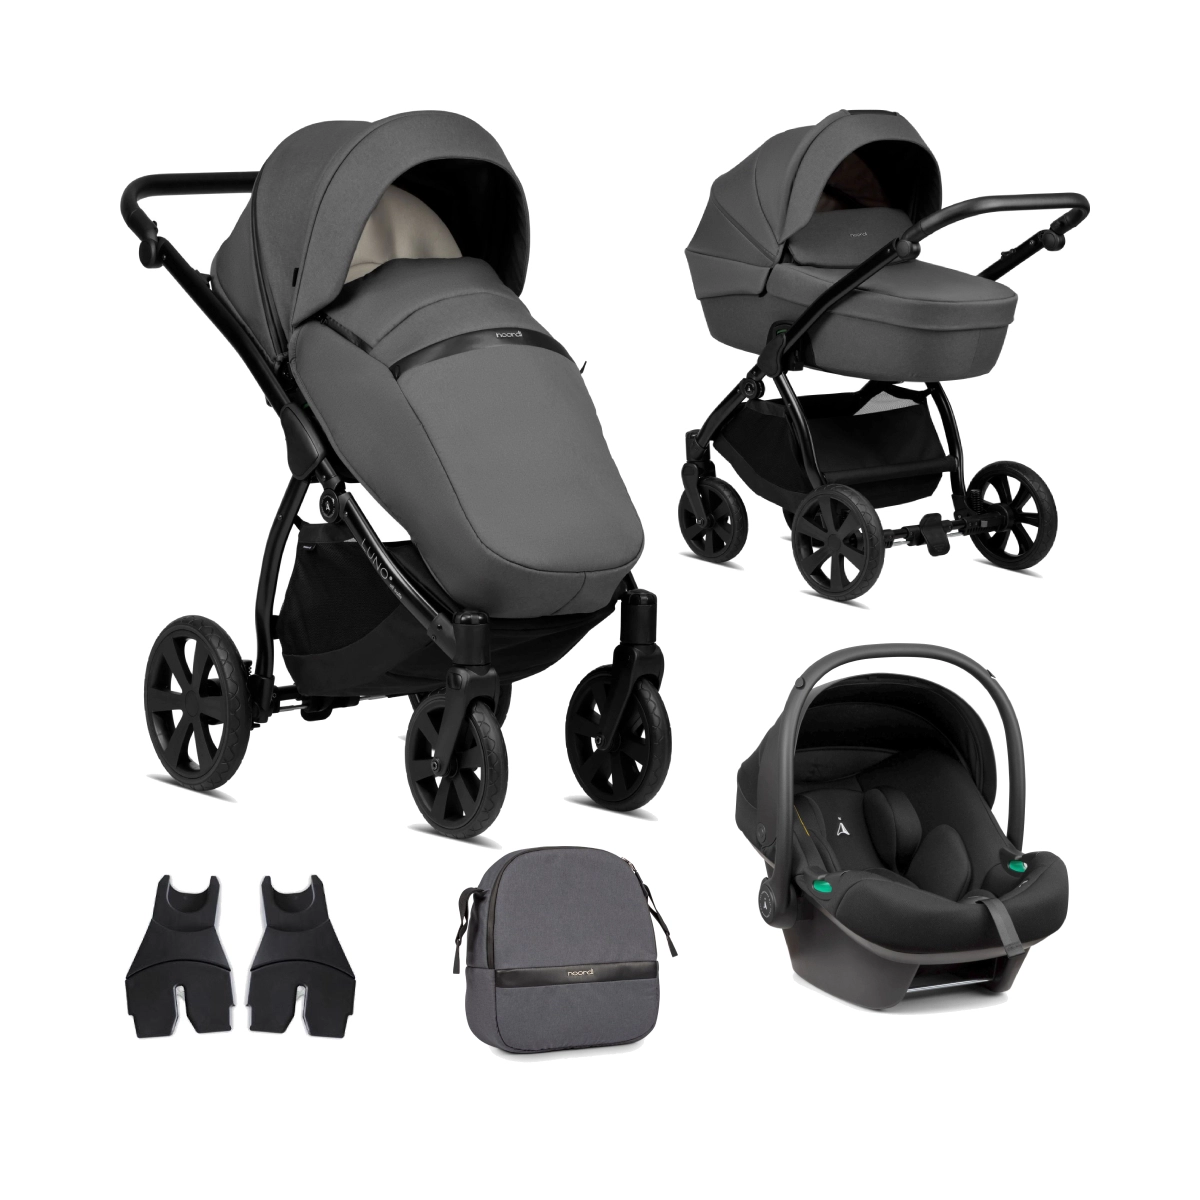 Noordi Luno All Trails 3in1 Travel System with Terra i-Size Car Seat